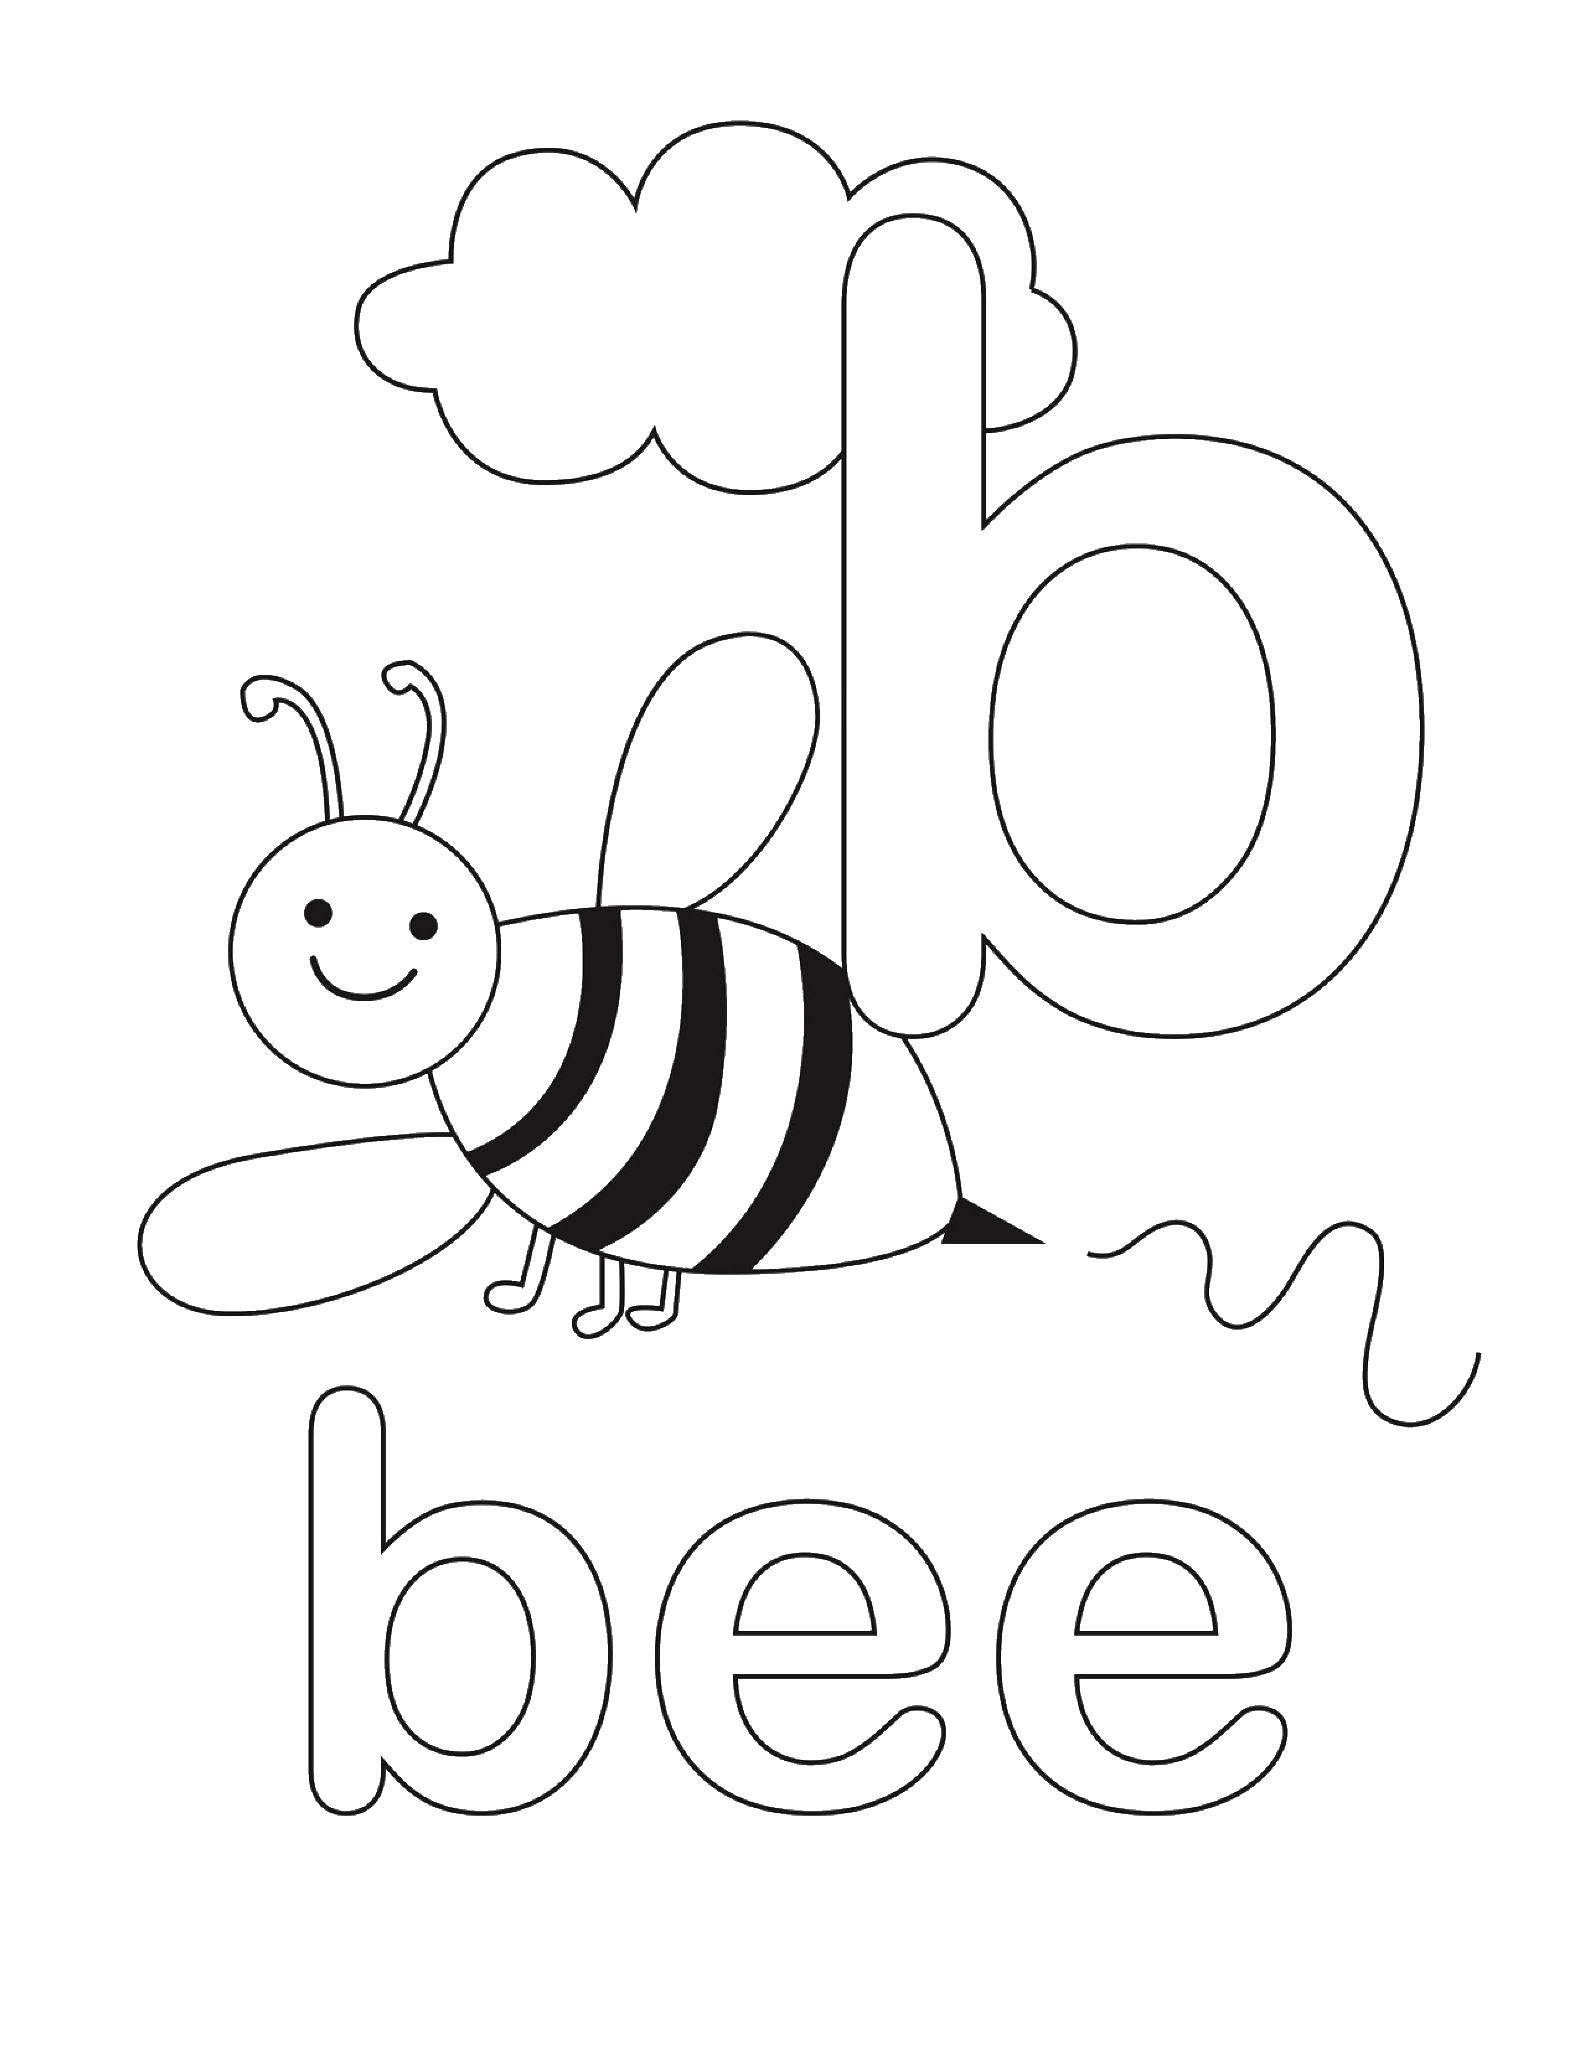 Coloring Bee. Category English words. Tags:  English words, bee.